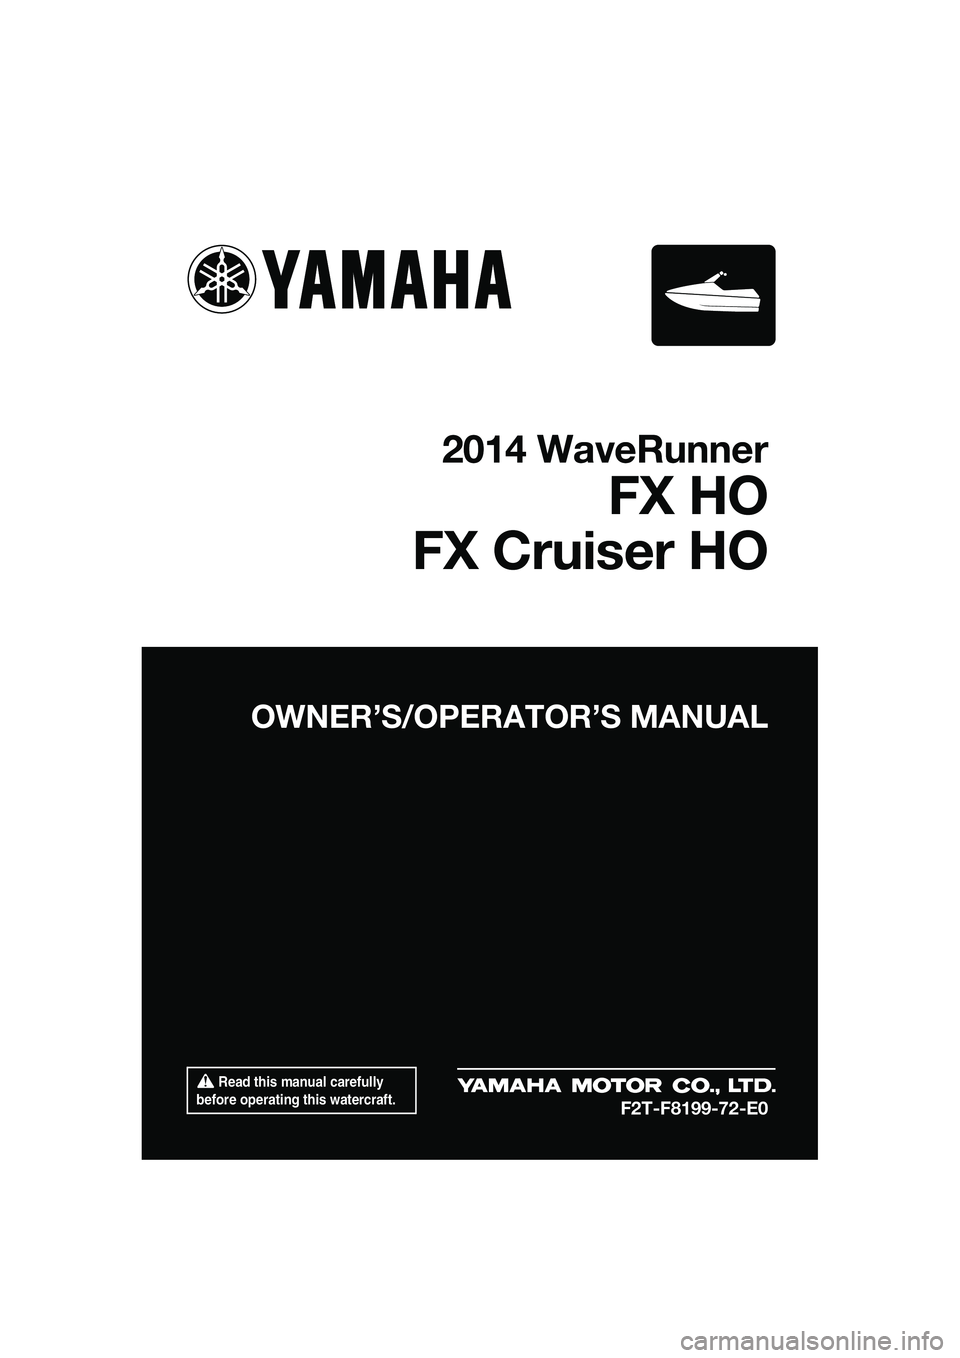 YAMAHA FX HO CRUISER 2014  Owners Manual  Read this manual carefully 
before operating this watercraft.
OWNER’S/OPERAT OR’S MANUAL
2014 WaveRunner
FX HO
FX Cruiser HO
F2T-F8199-72-E0
UF2T72E0.book  Page 1  Monday, July 22, 2013  2:26 PM 